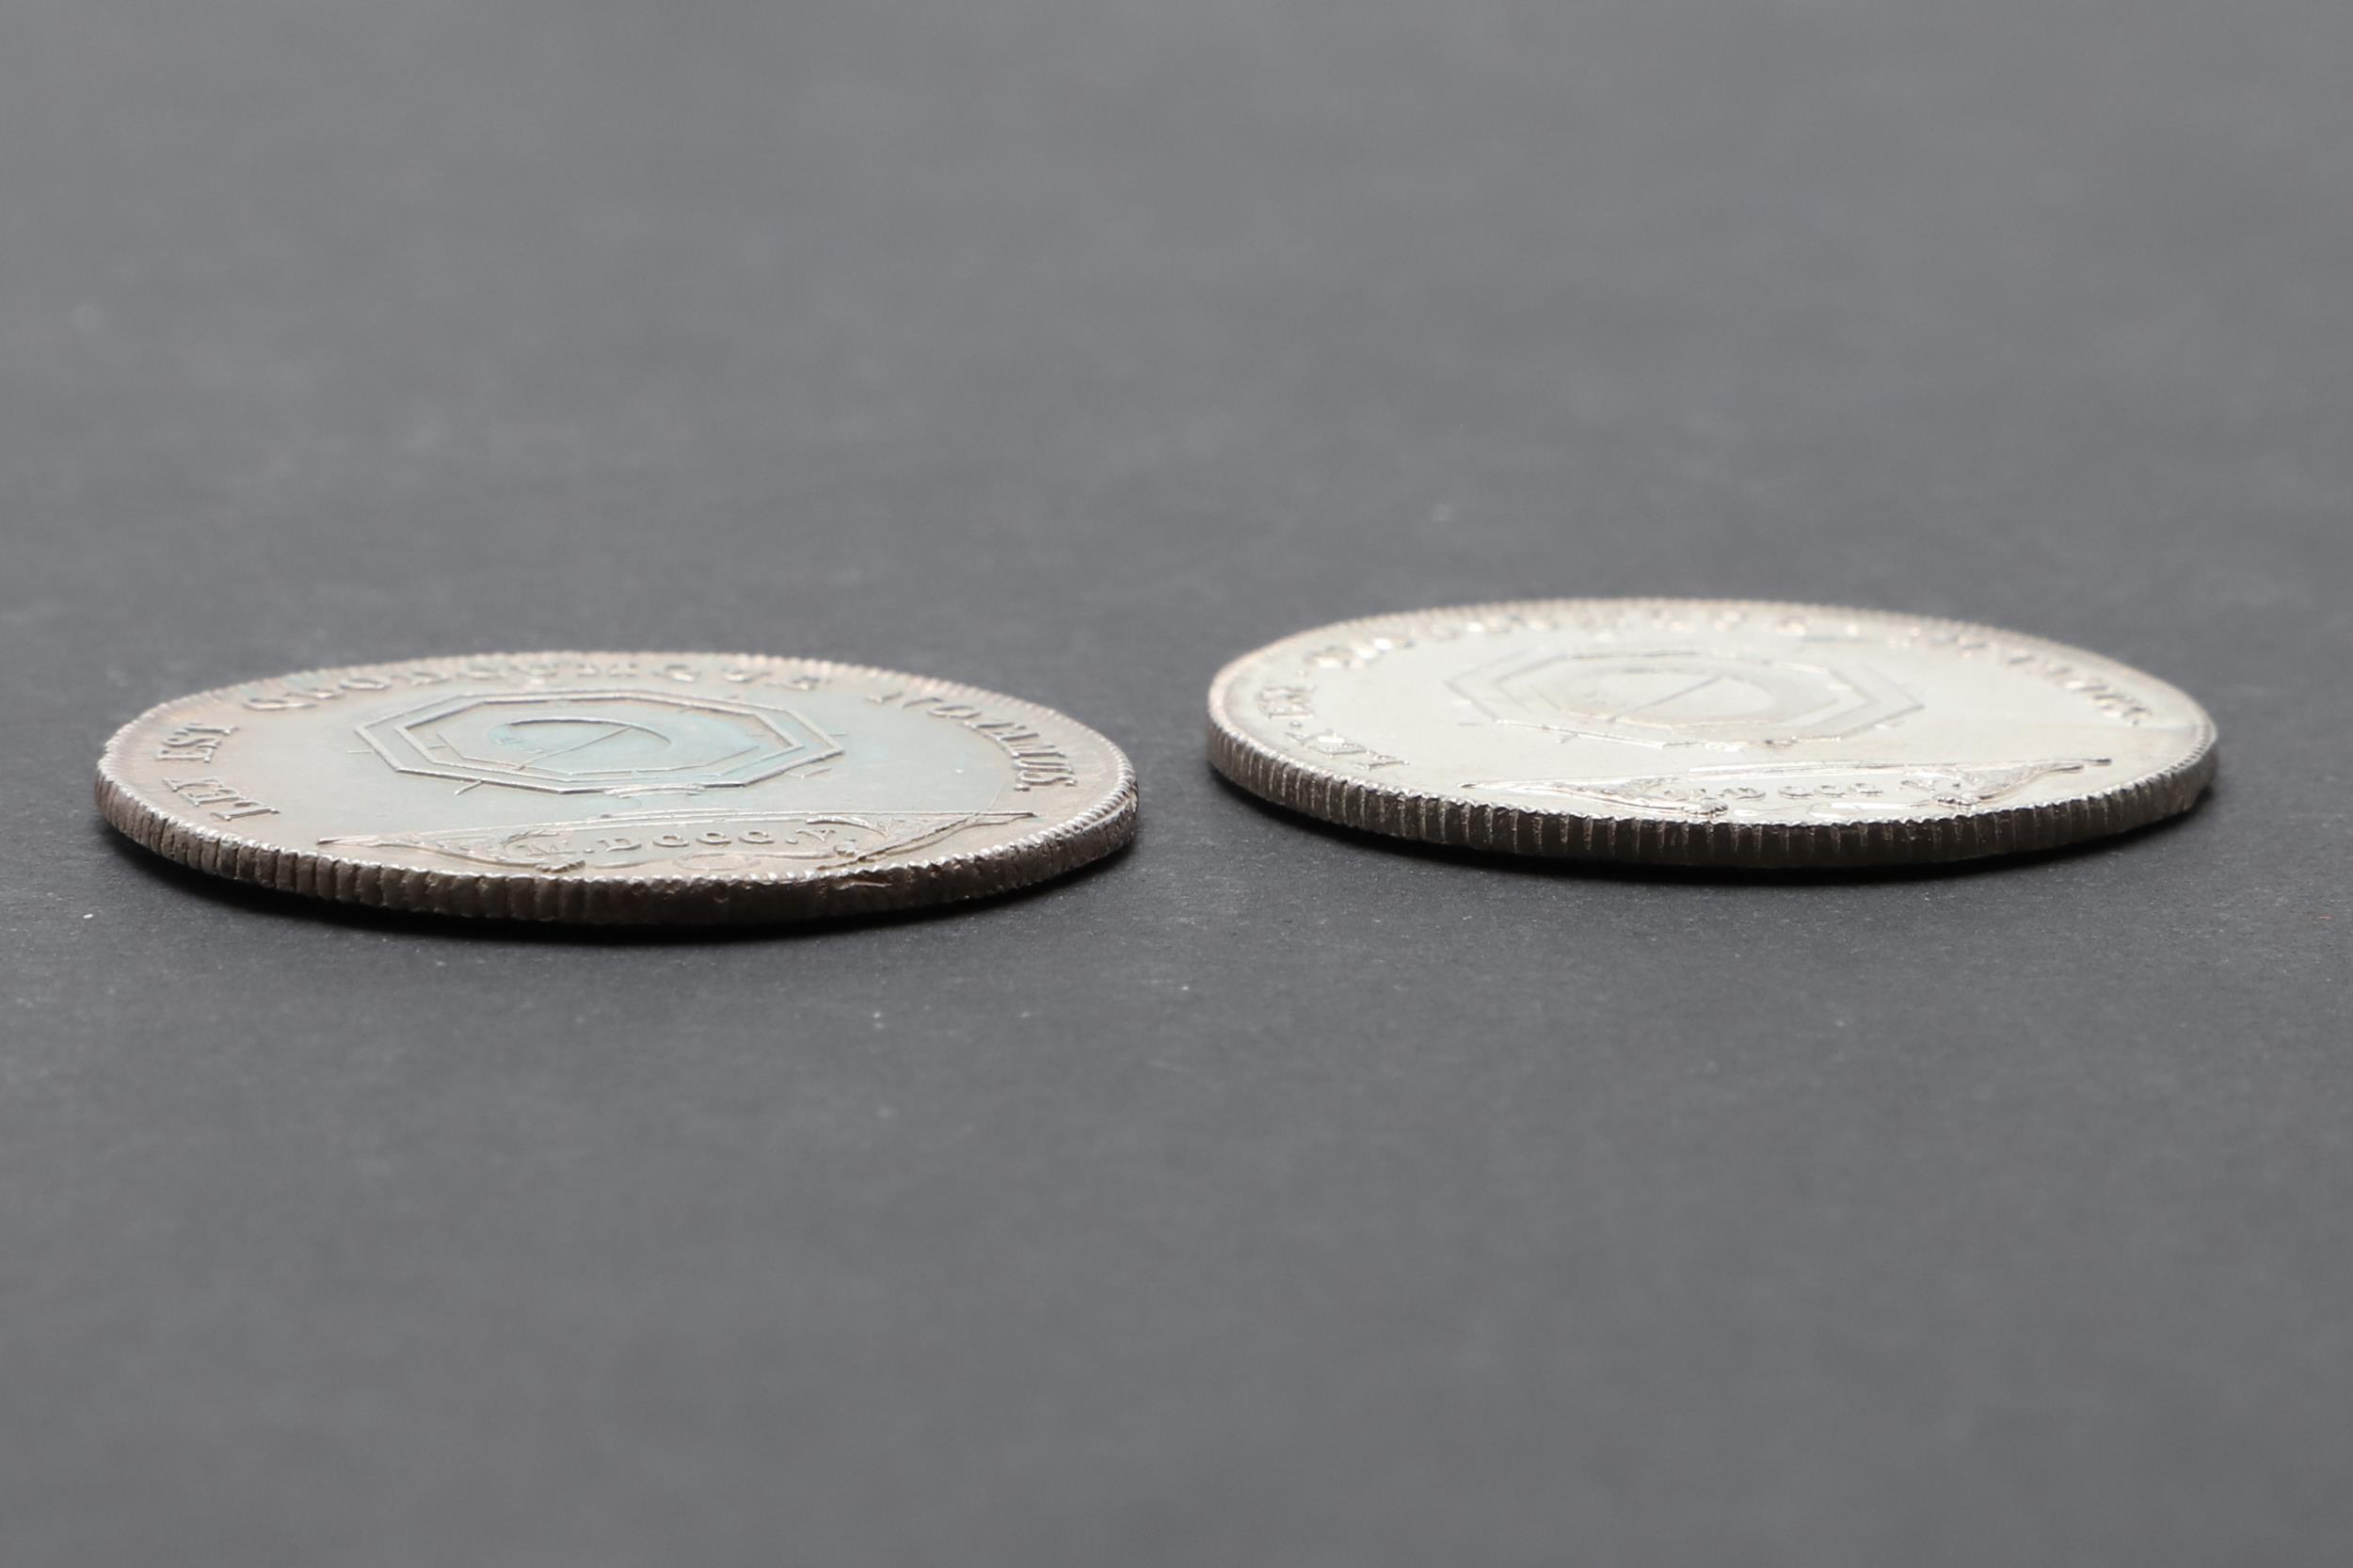 TWO EARLY 19TH CENTURY FRENCH NOTARY TOKENS FROM LYON. - Image 3 of 3